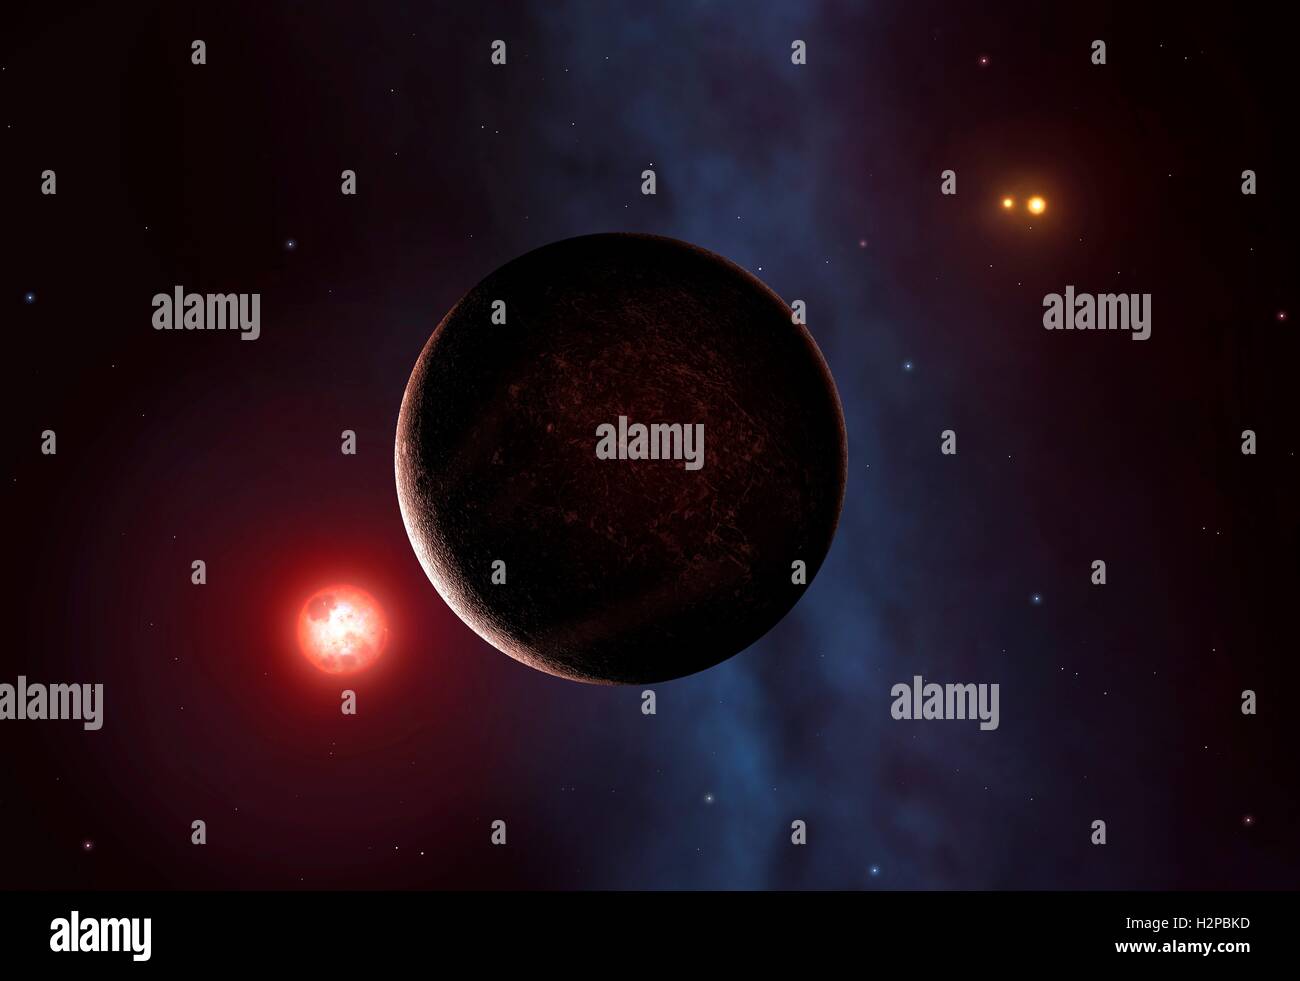 Proxima is the nearest star to the Sun. It is a dim red dwarf, smaller than our Sun and many thousands of times fainter. Here we see it seen with an orbiting rocky planet, recently discovered. To the right you can also make out Alpha Centauri, which is a binary star with two Sun-like components. The Alpha Centauri pair orbit each other quite closely, while Proxima orbits this pair much further out, forming a triple star system Stock Photo